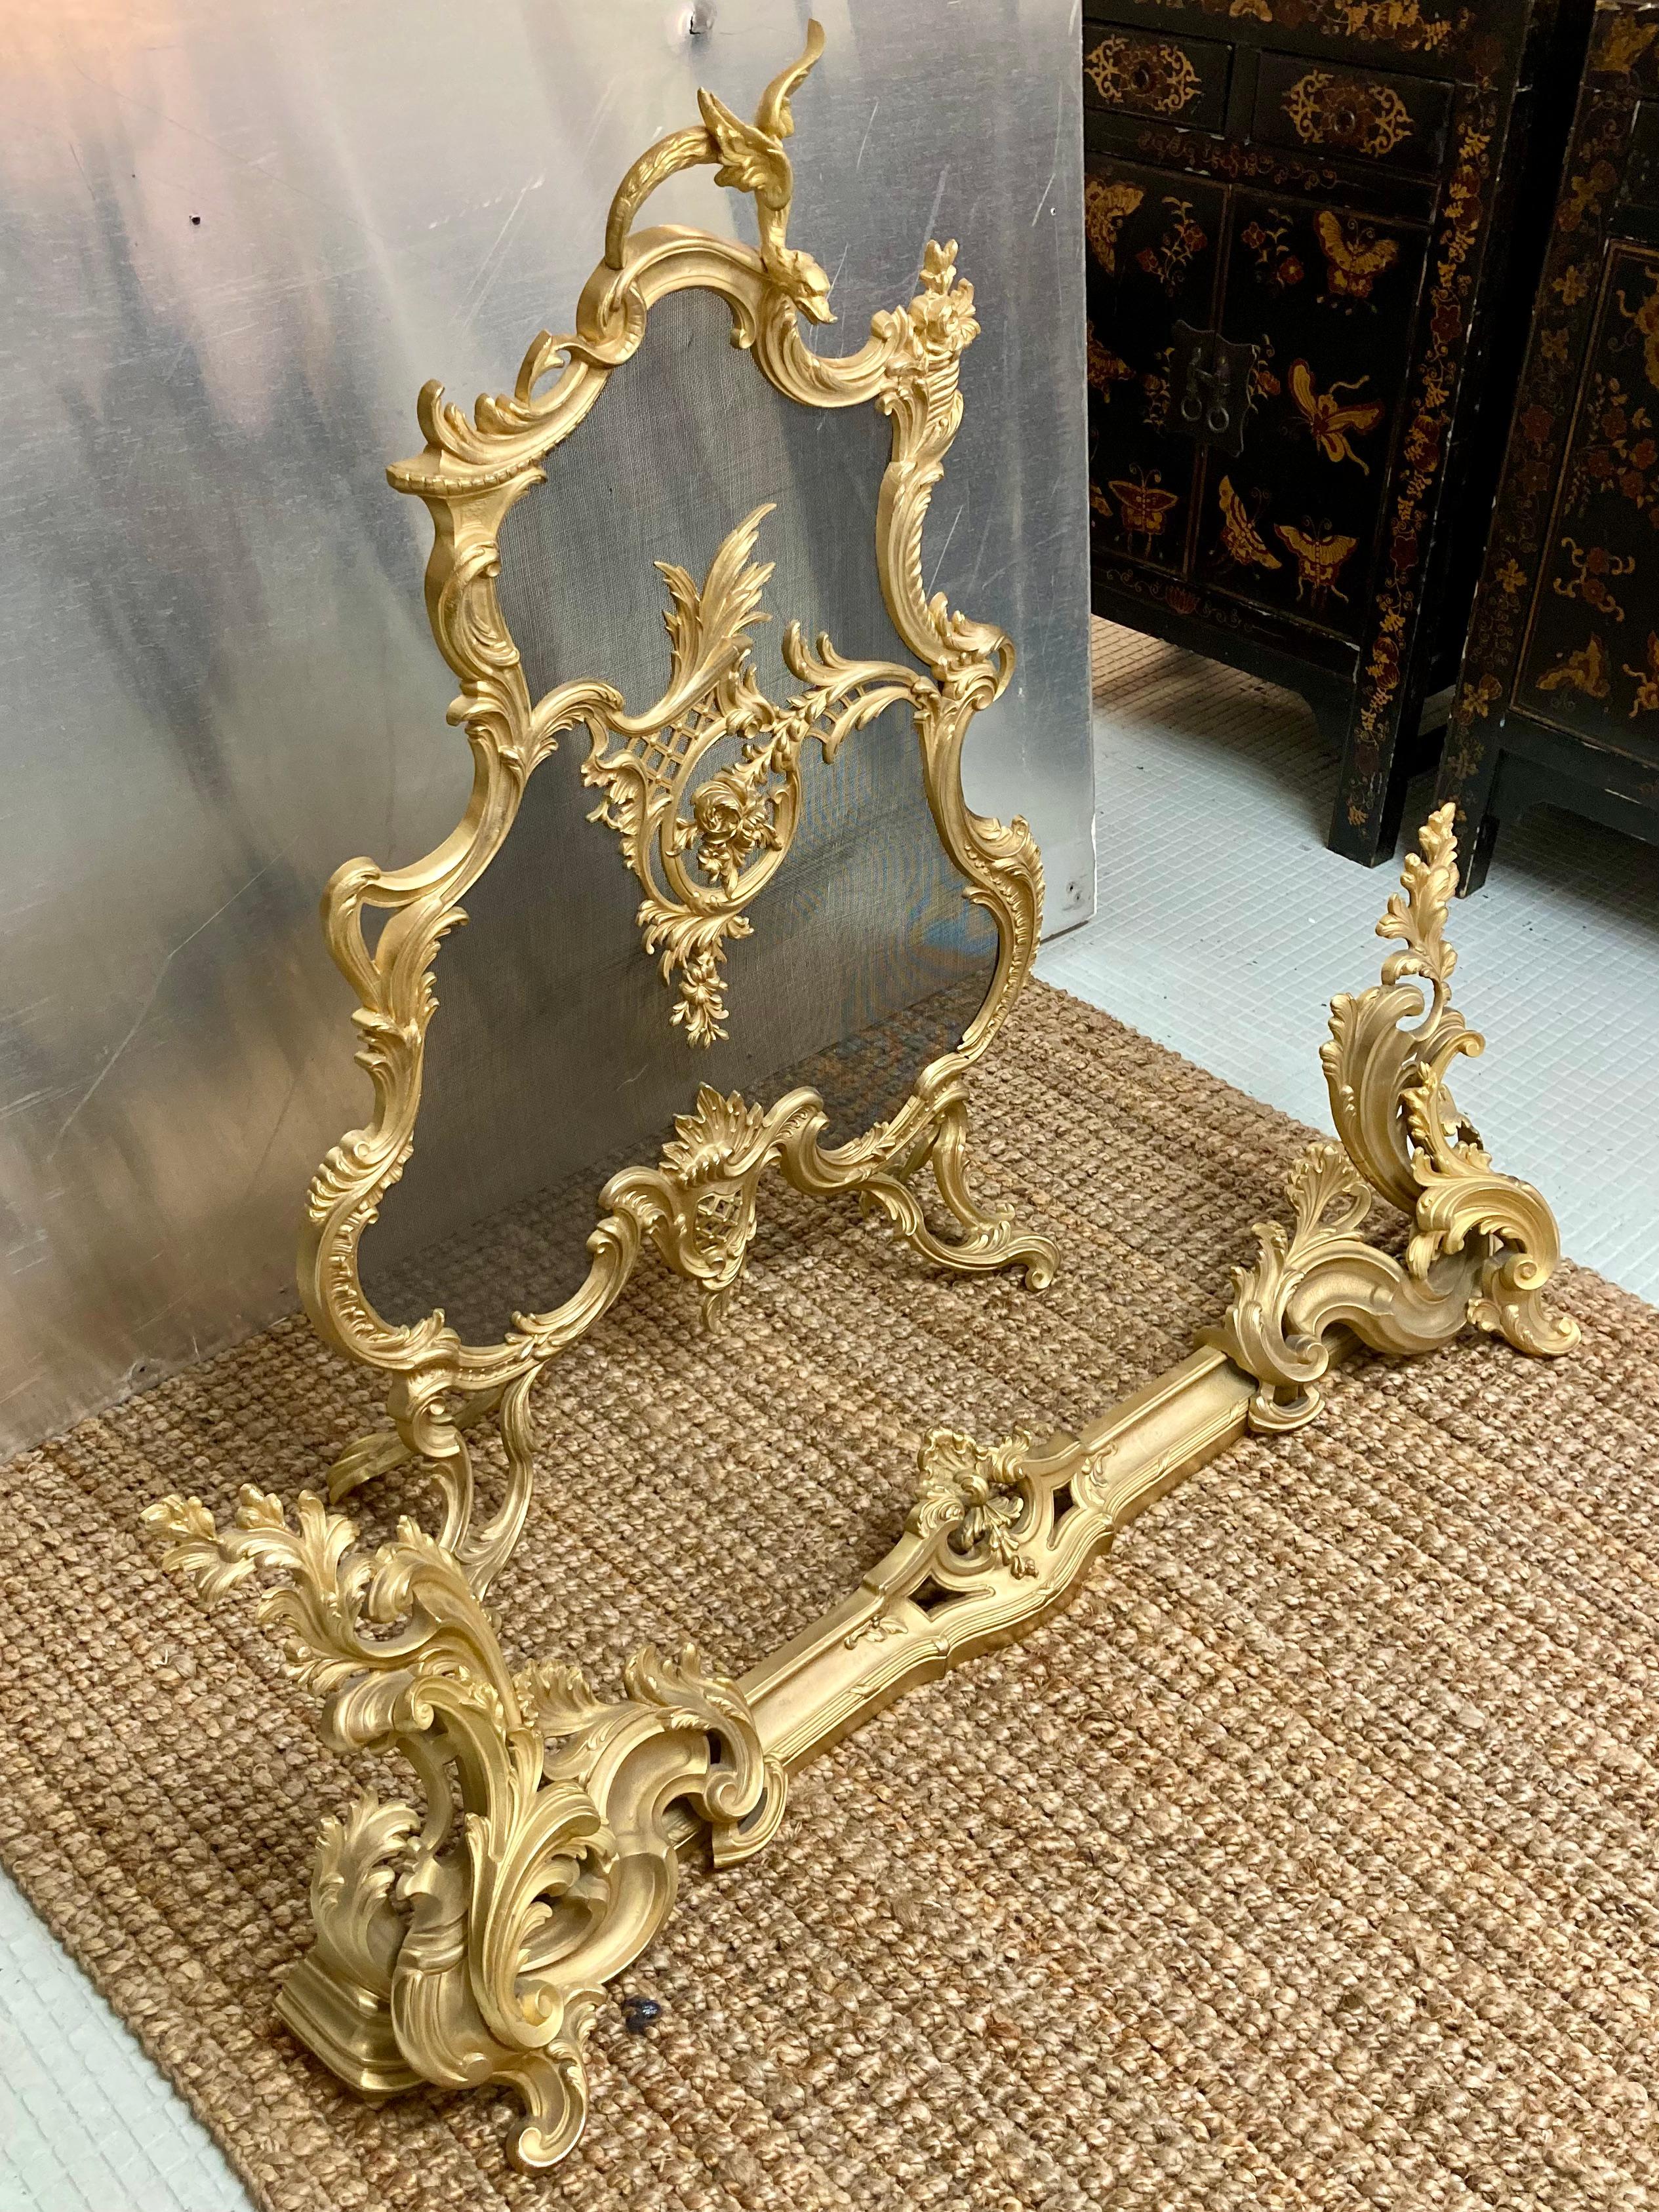 Beautiful 2-piece French 19th c Louis XV gilt bronze fireplace screen and fender set. Amazing bronze casting with gilt finish . Very bright and clean gilt. Very exquisite set. Add some French style to your home.